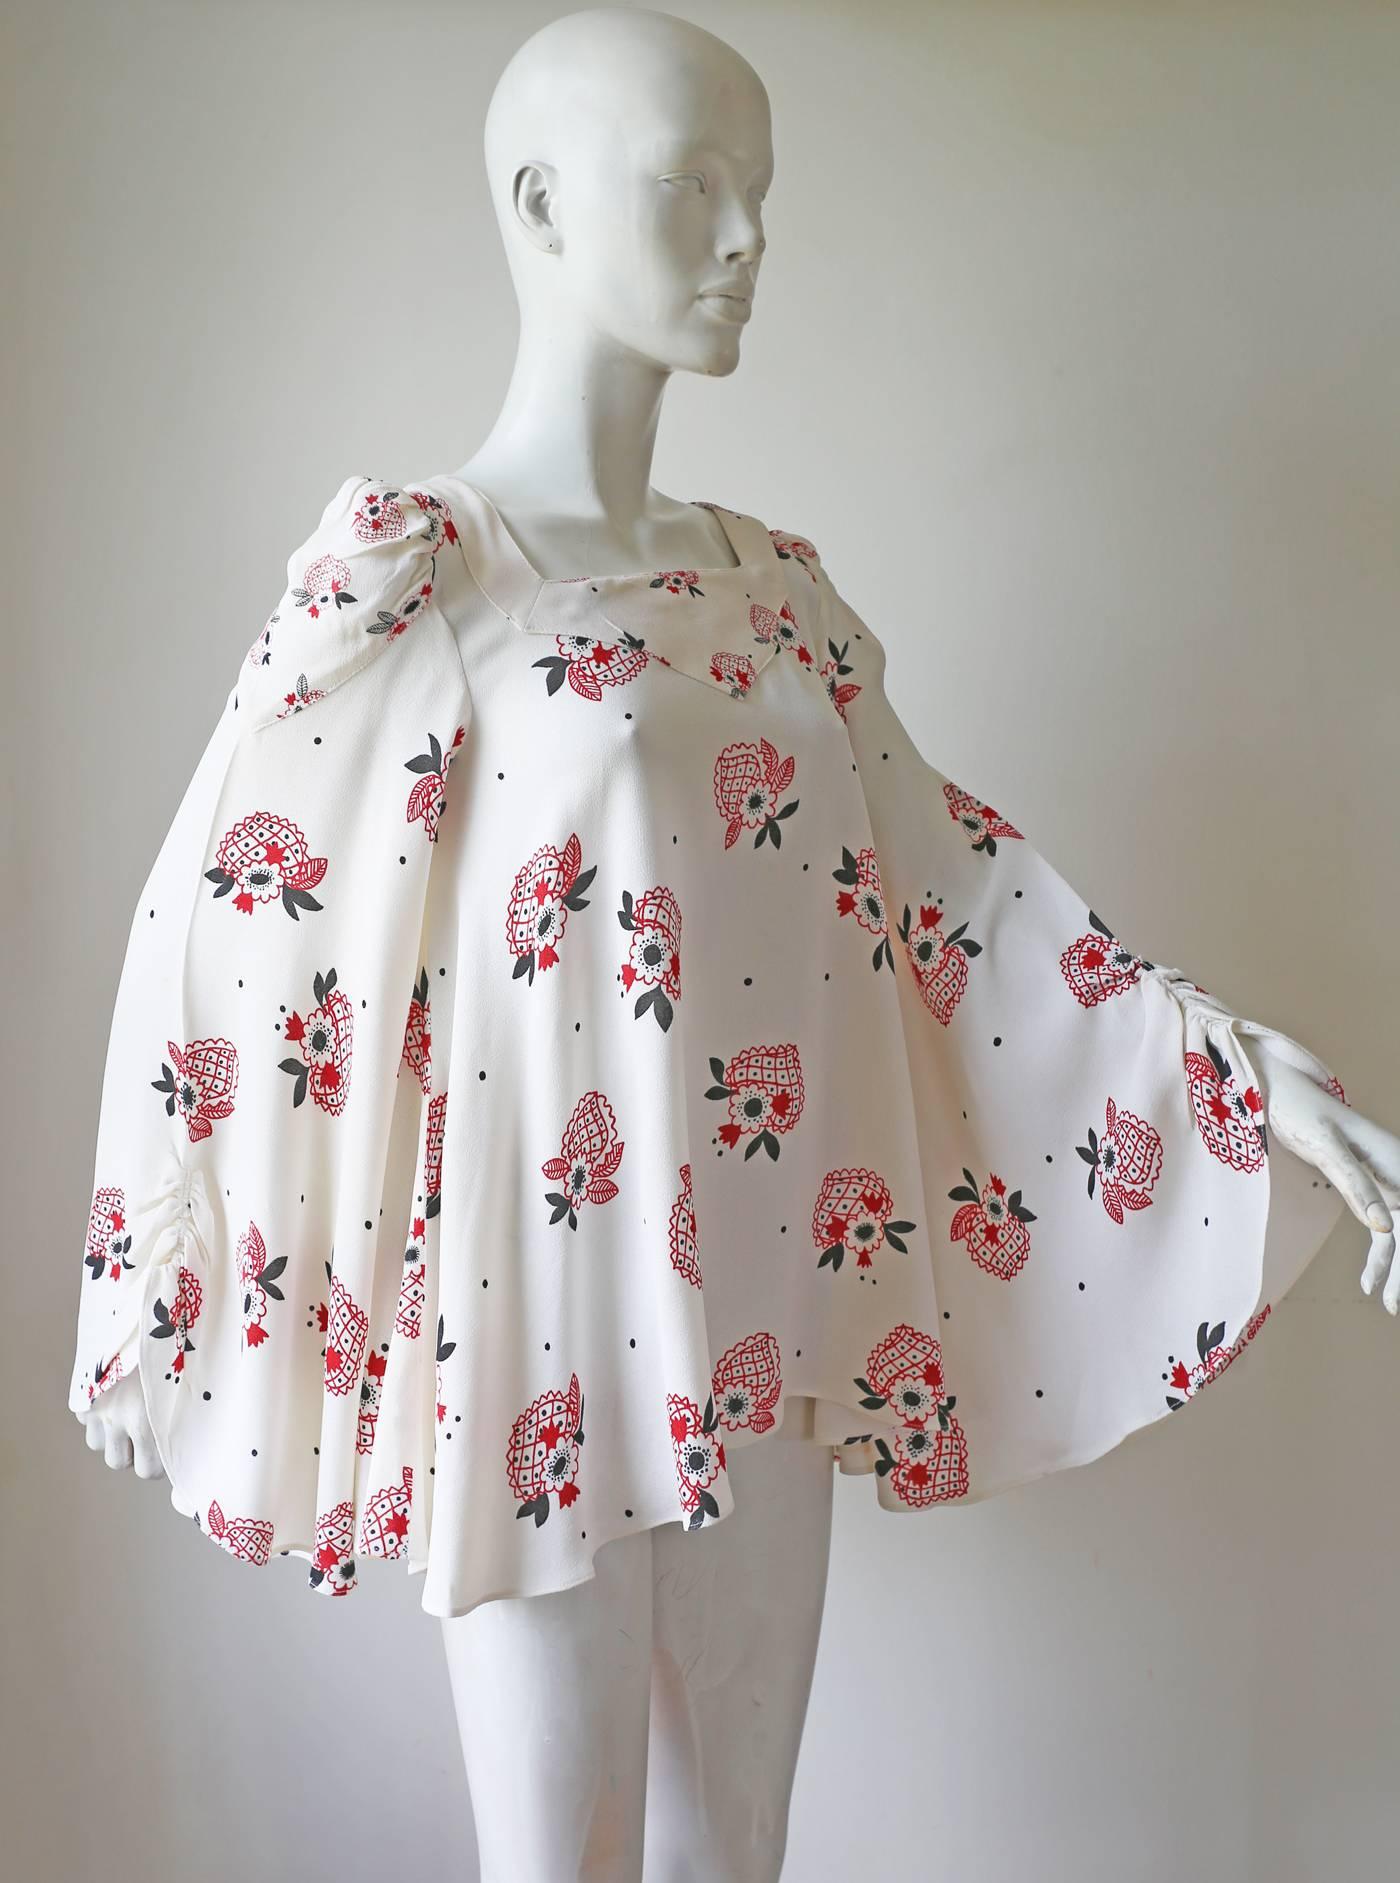 A beautiful Ossie Clark blouse with a Celia Birtwell print and huge ruched bell sleeves.

Small